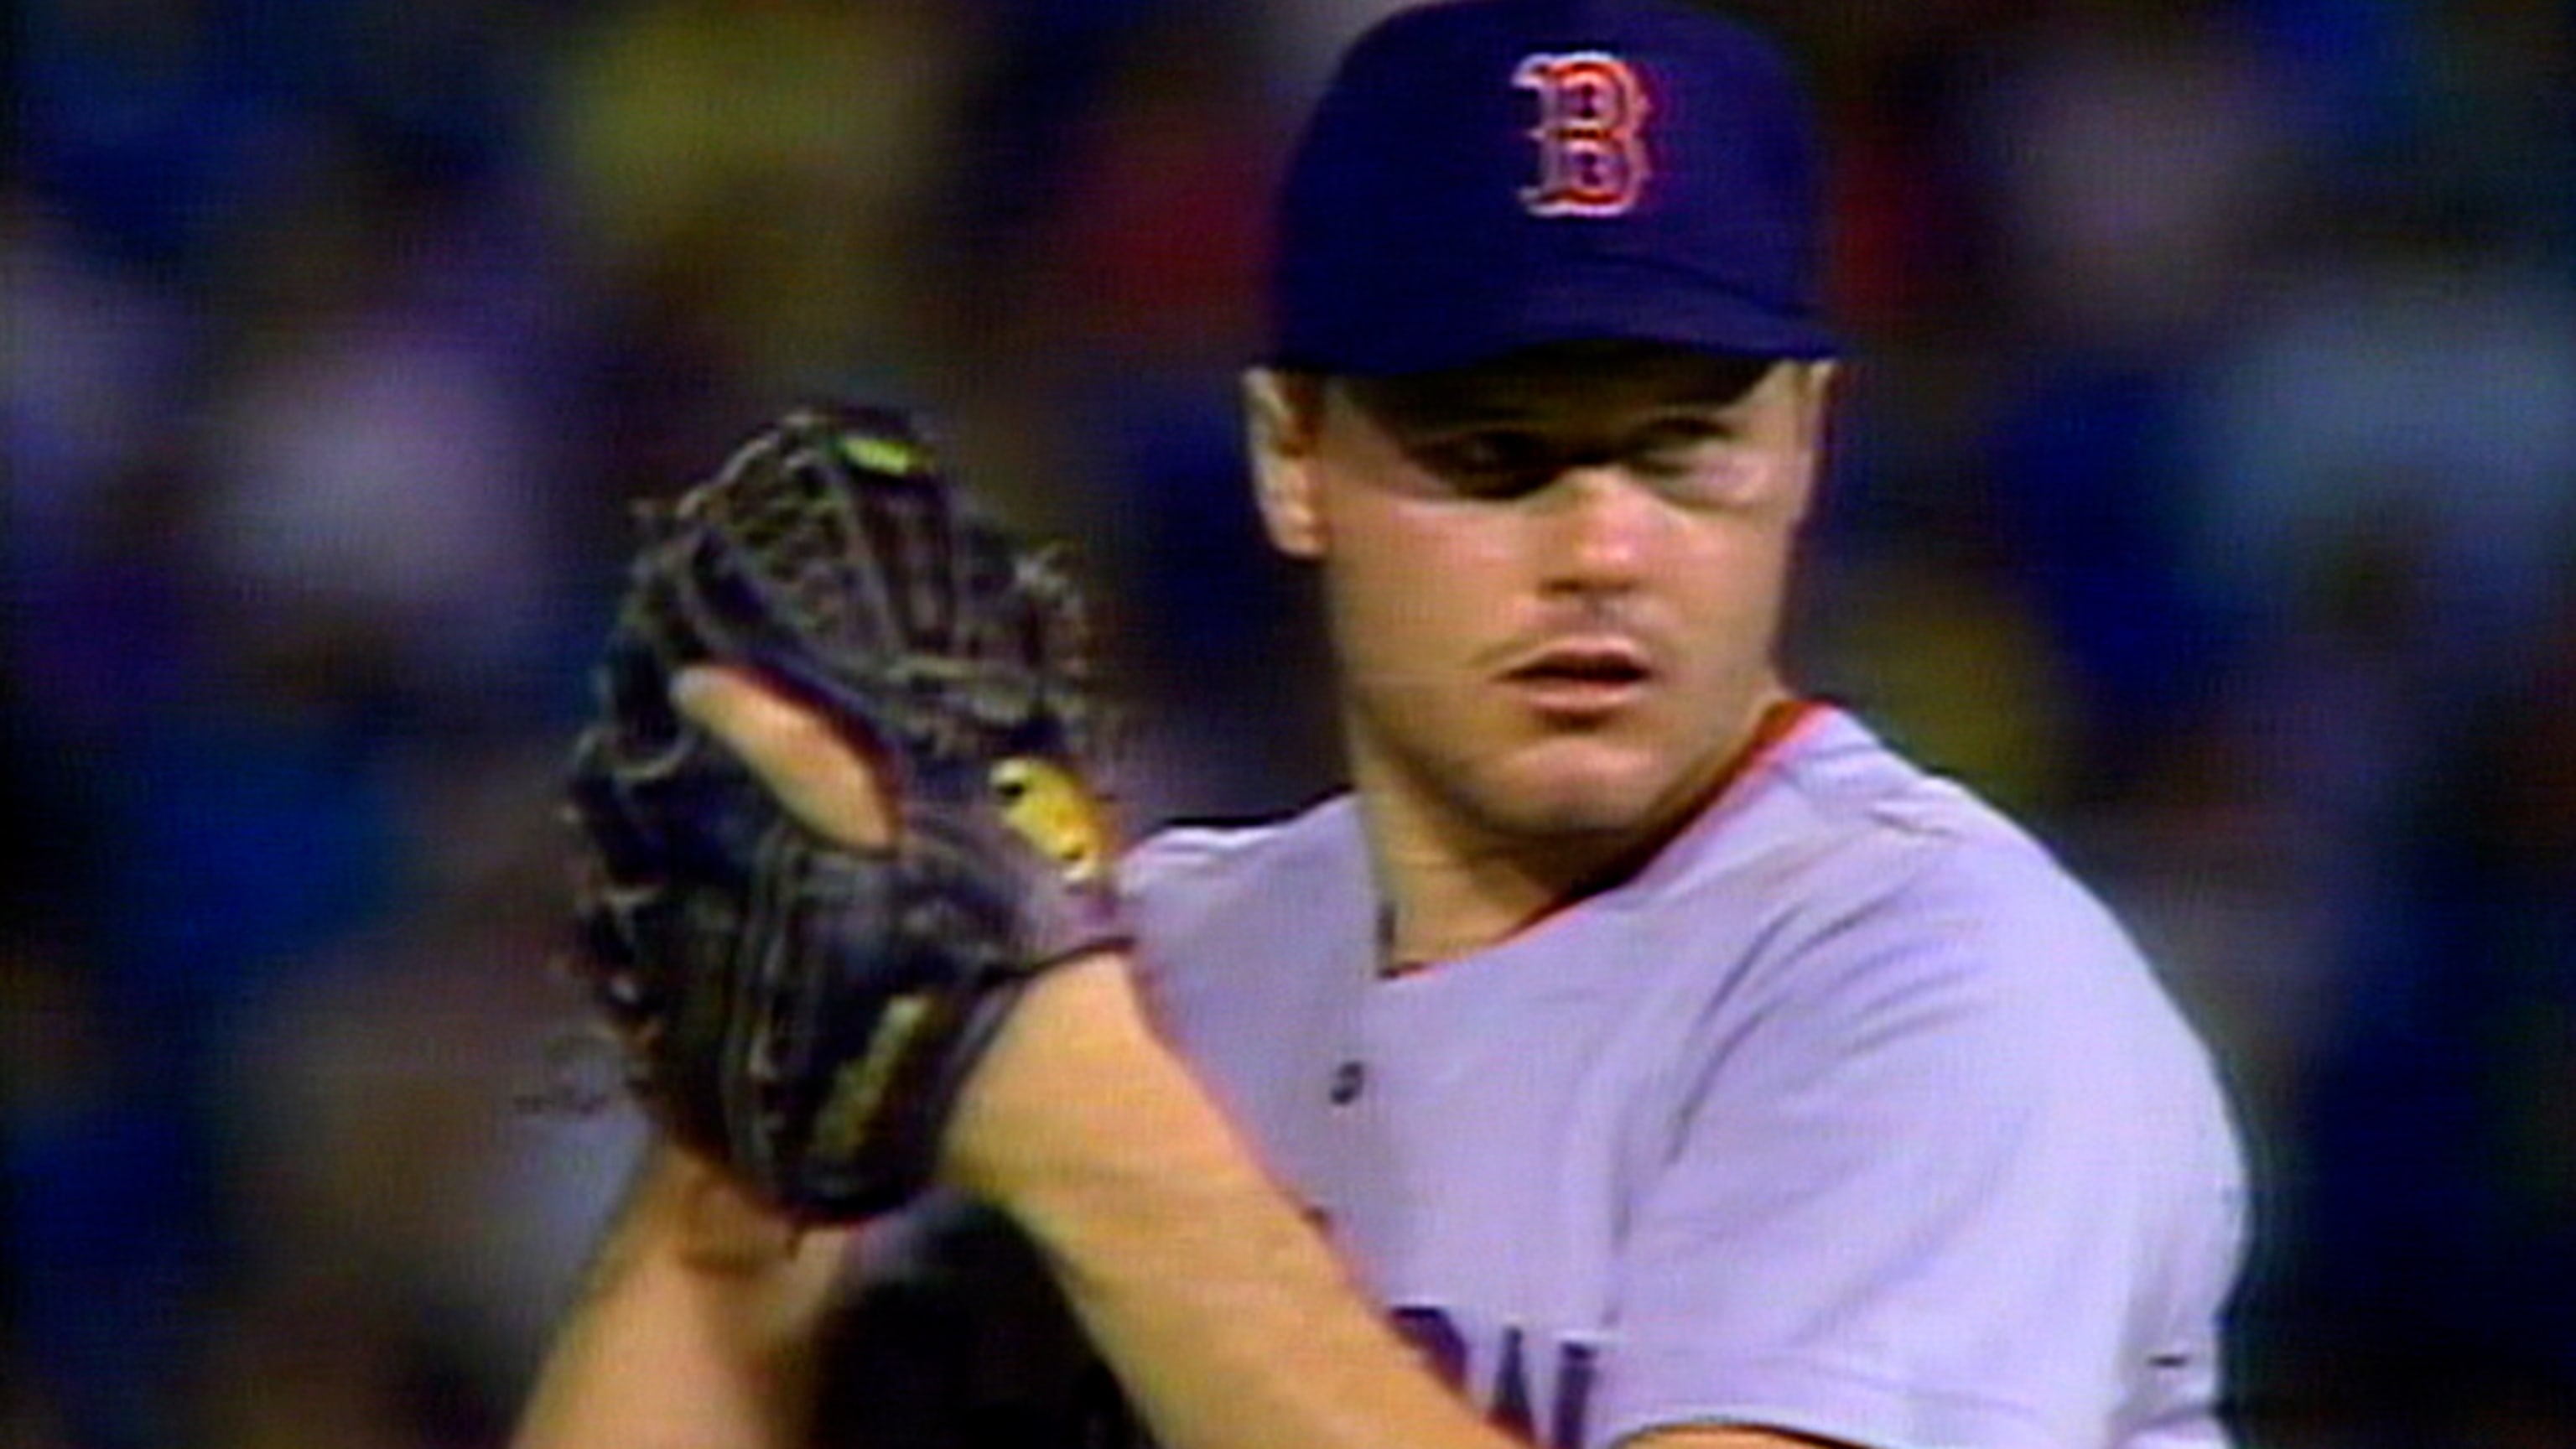 Roger Clemens' top moments